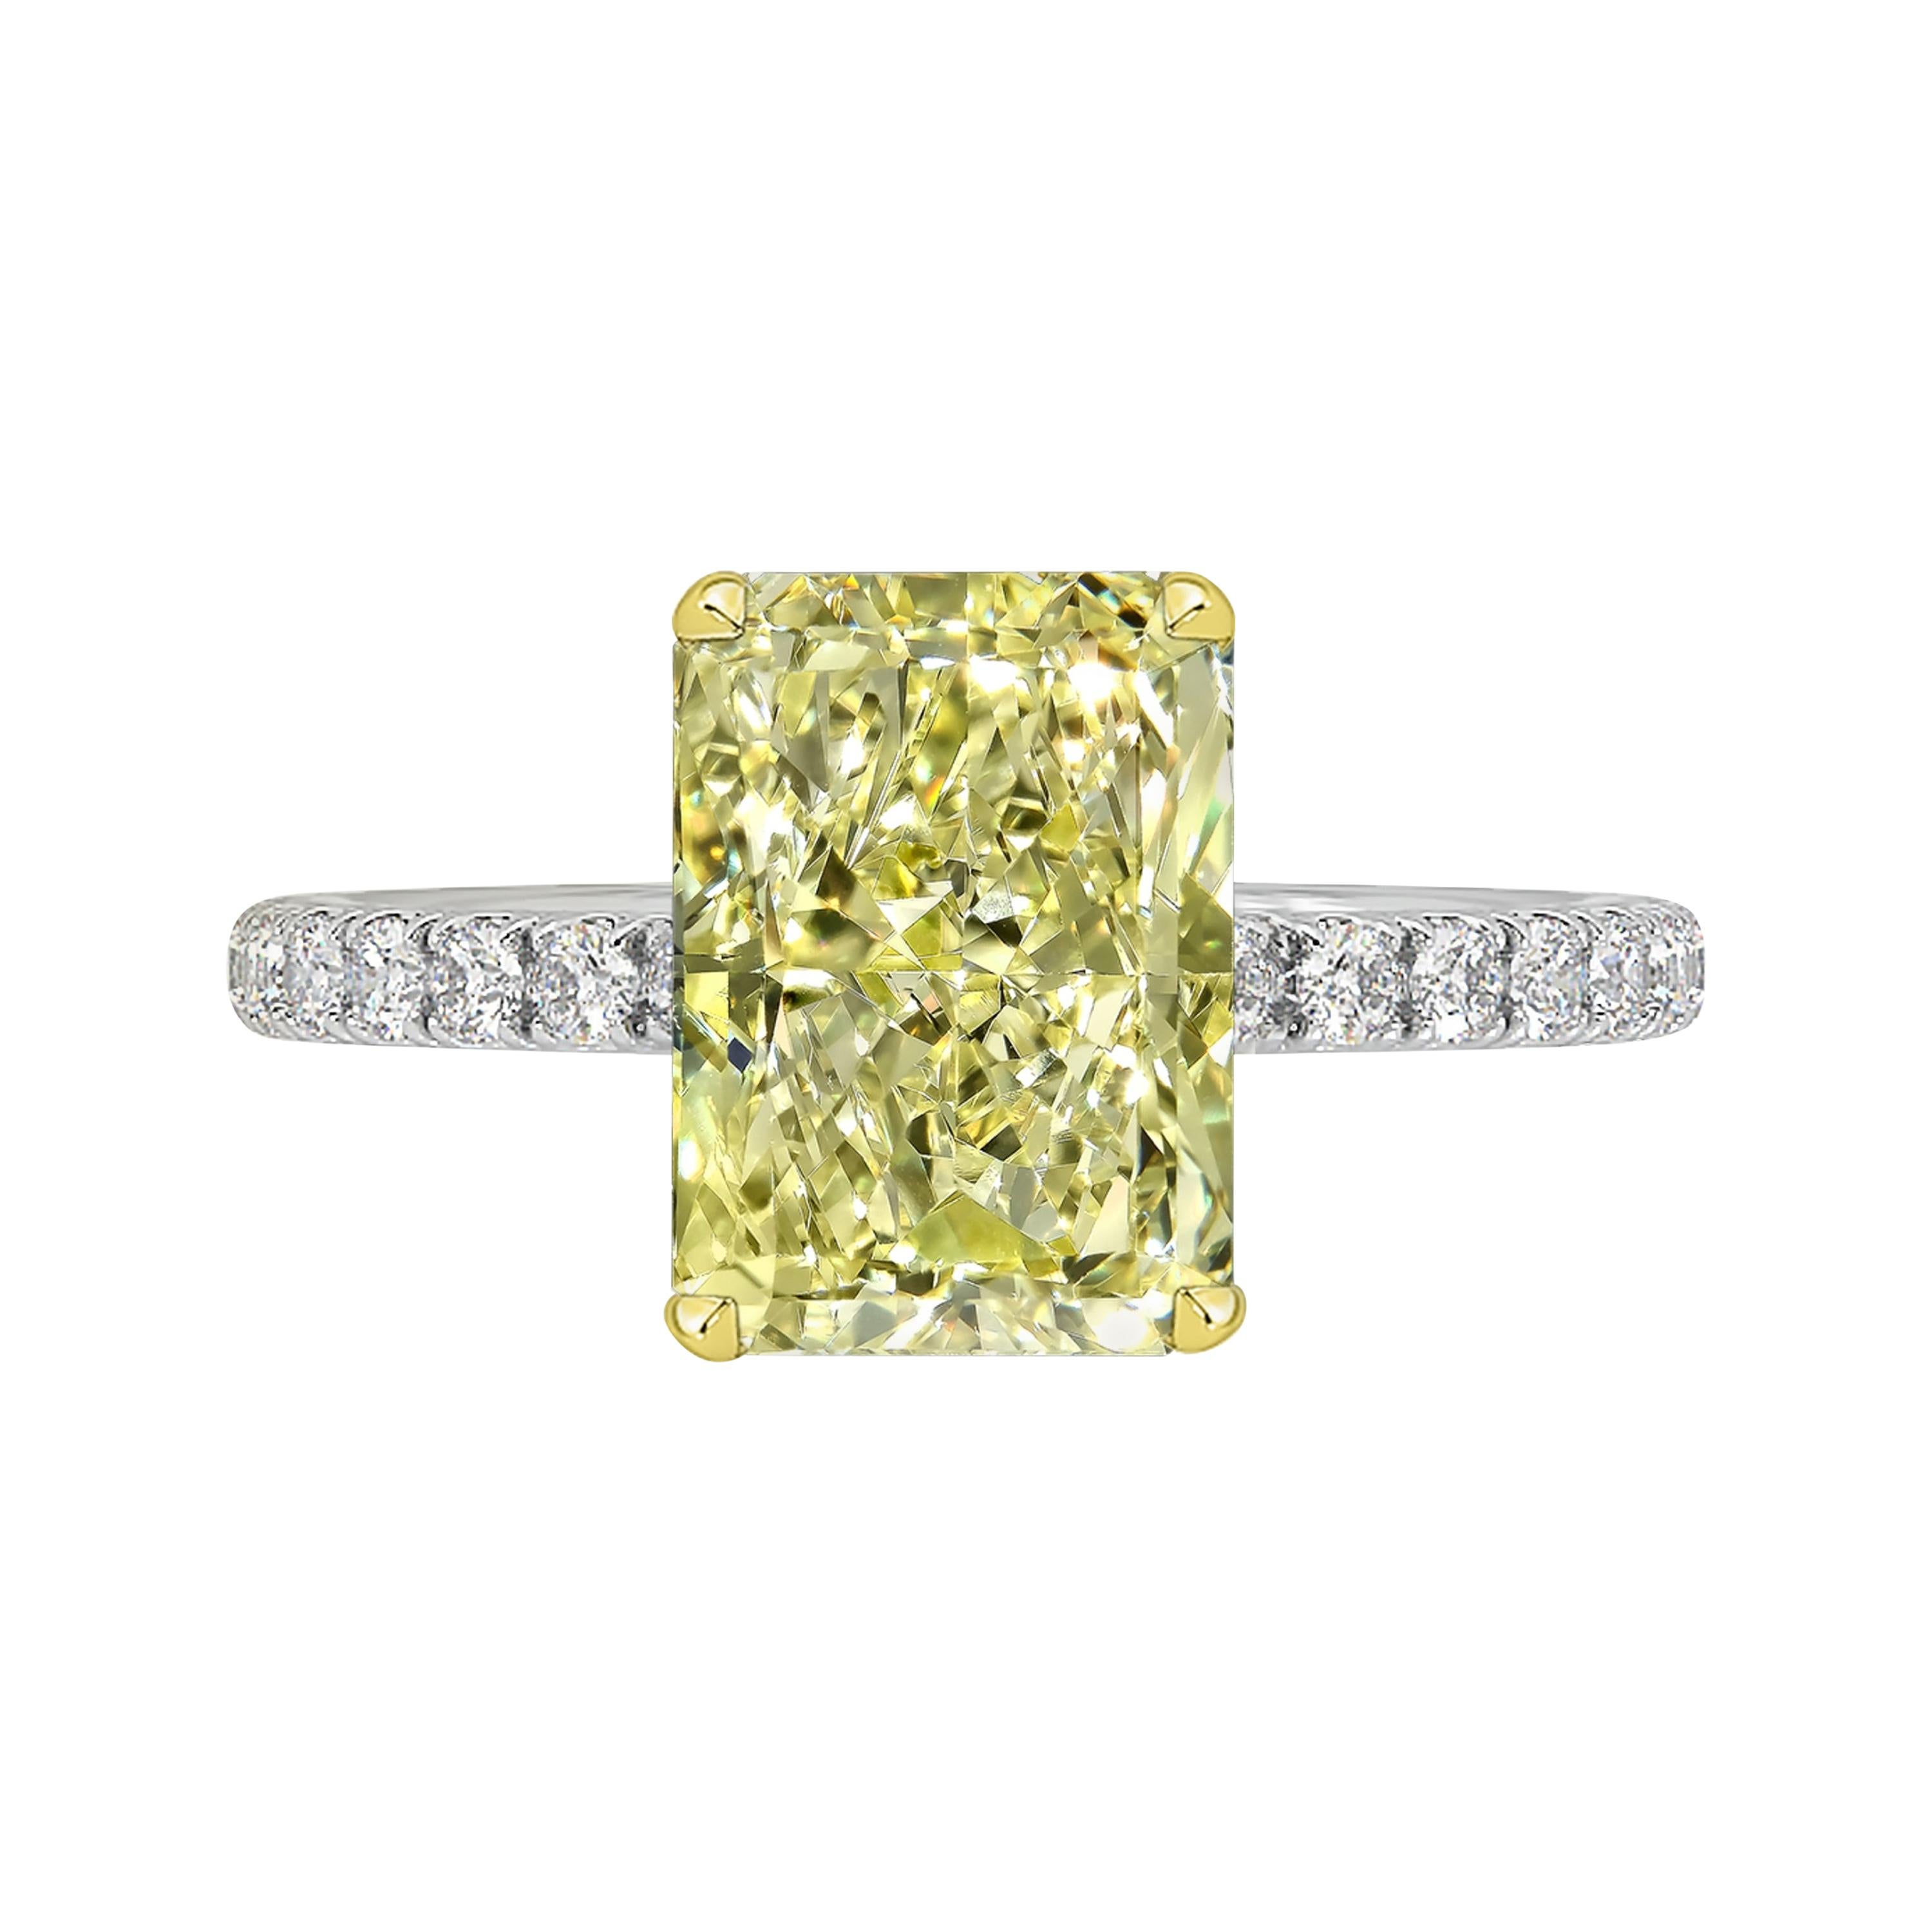 GIA Certified 3.02 Carat Radiant Cut Yellow Diamond Ring For Sale